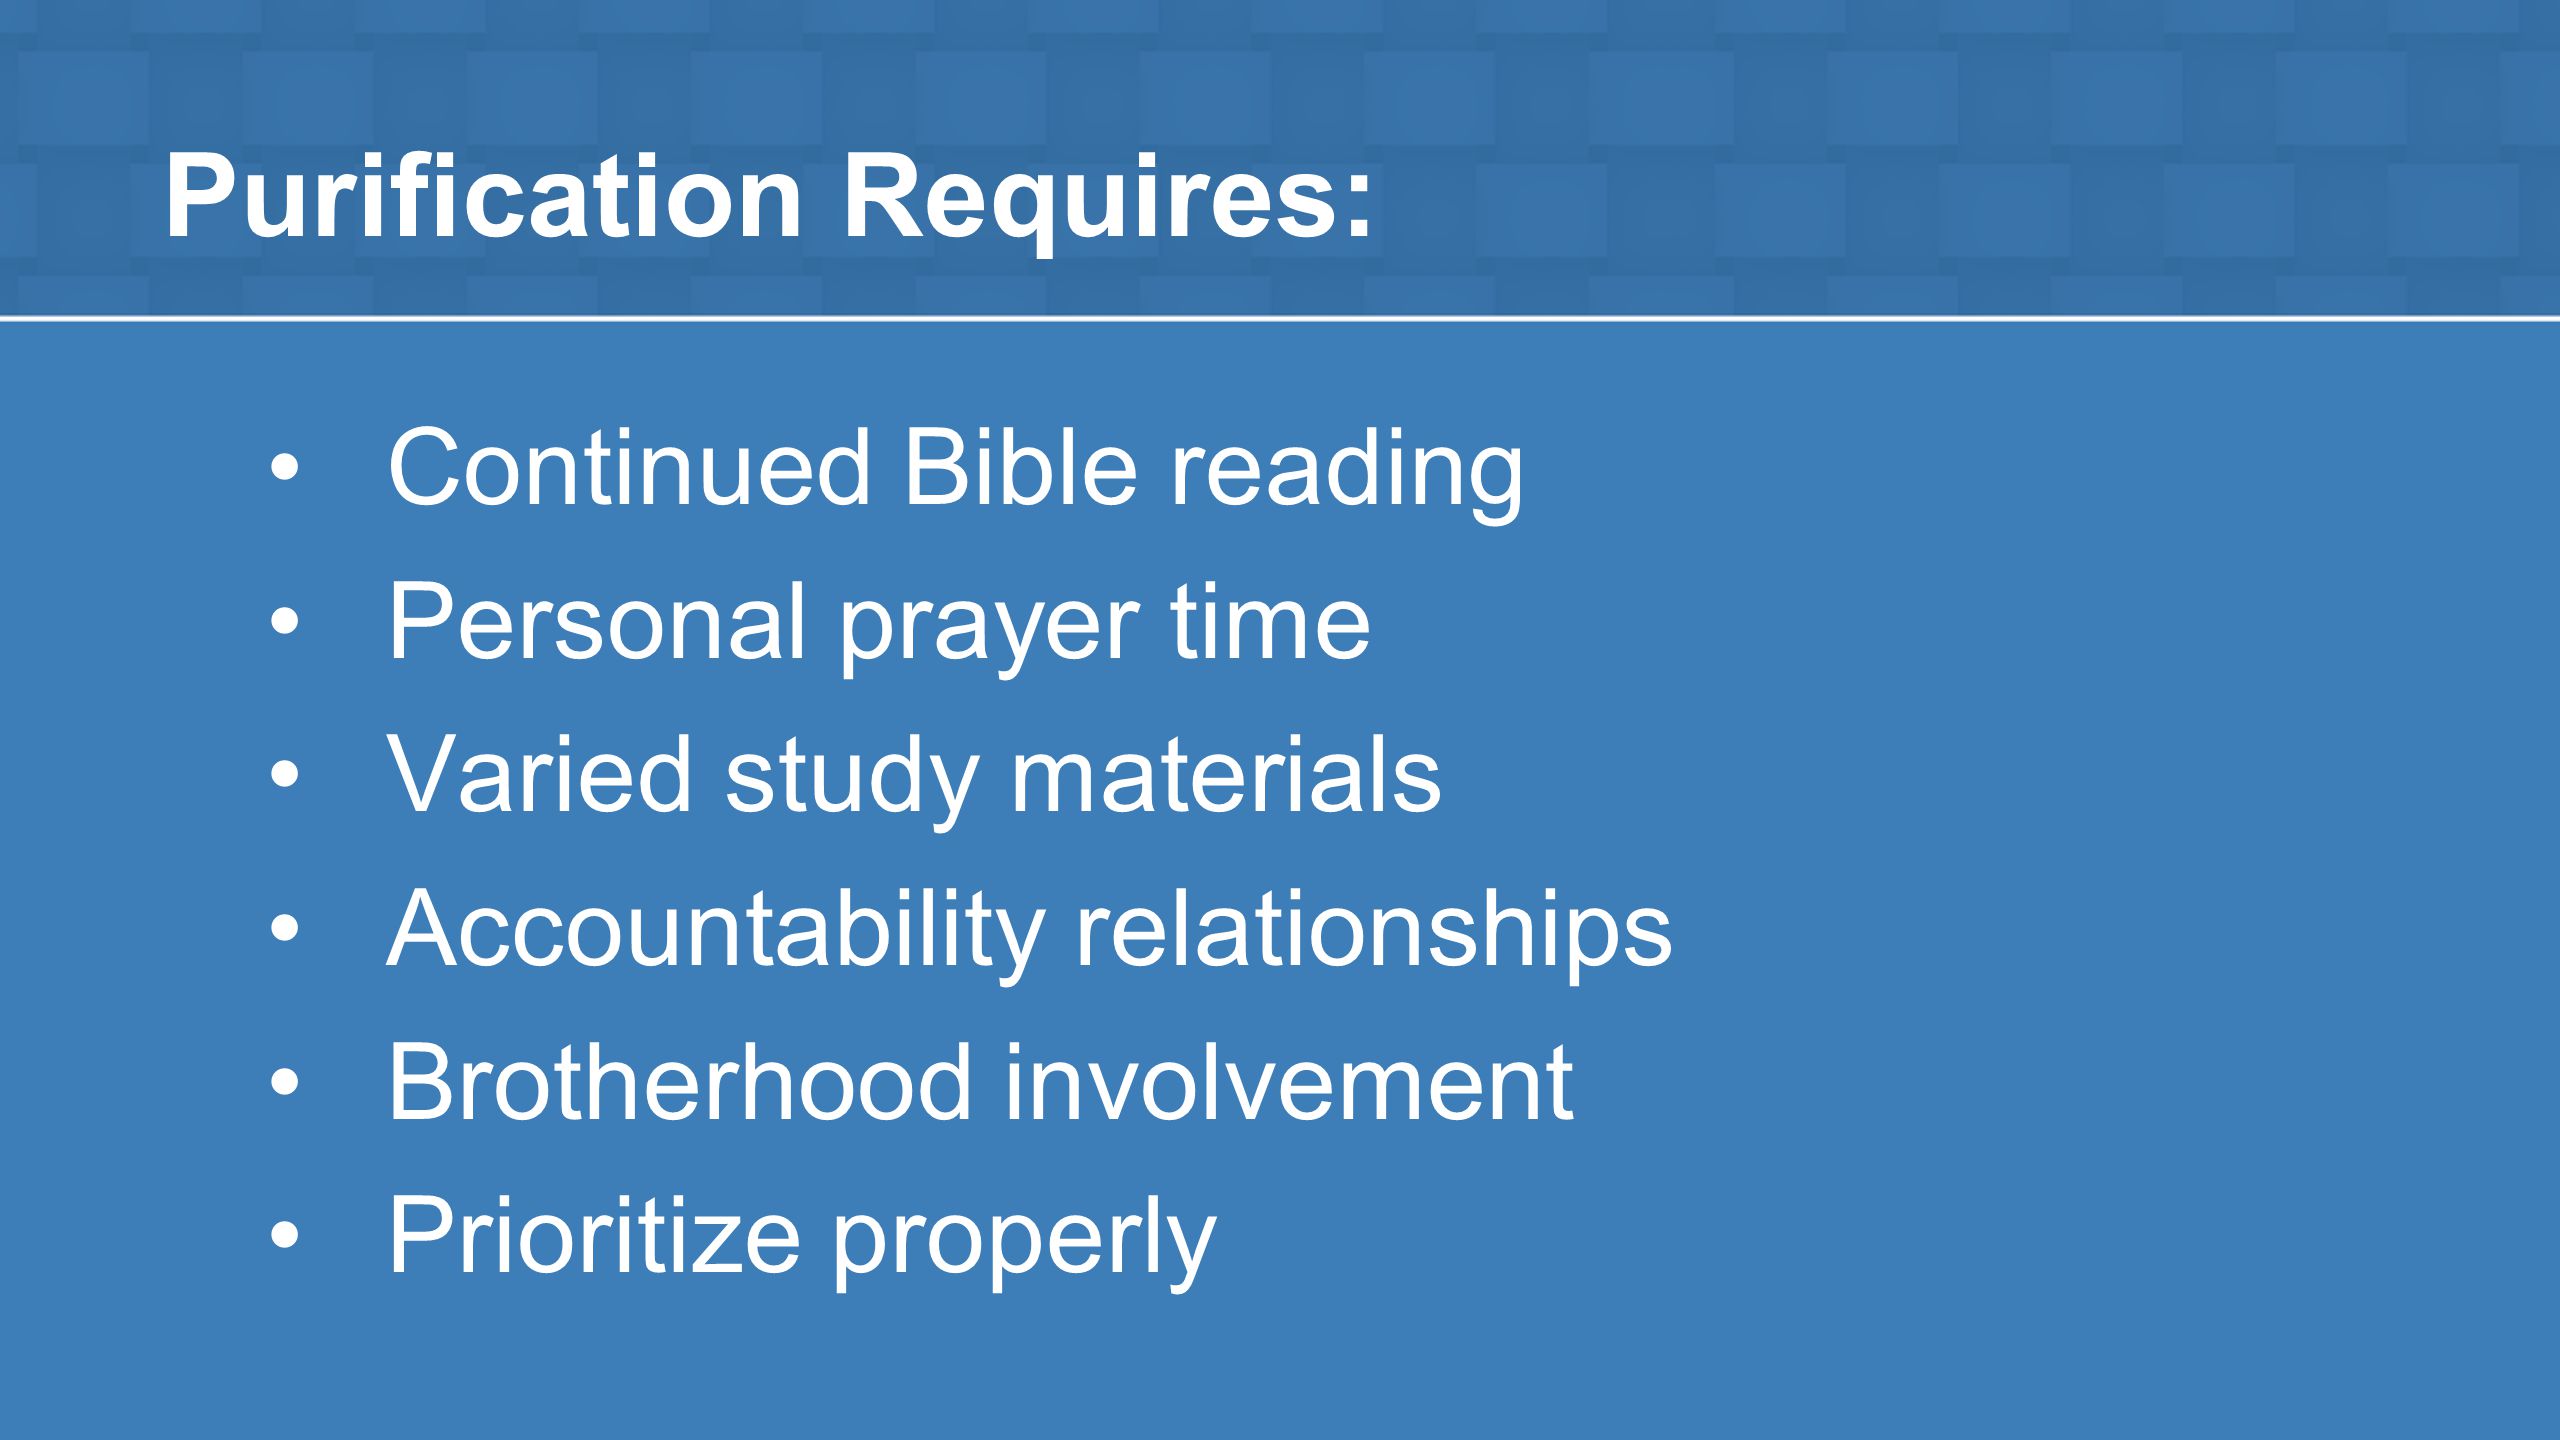 Purification Requires: Continued Bible reading Personal prayer time Varied study materials Accountability relationships Brotherhood involvement Prioritize properly